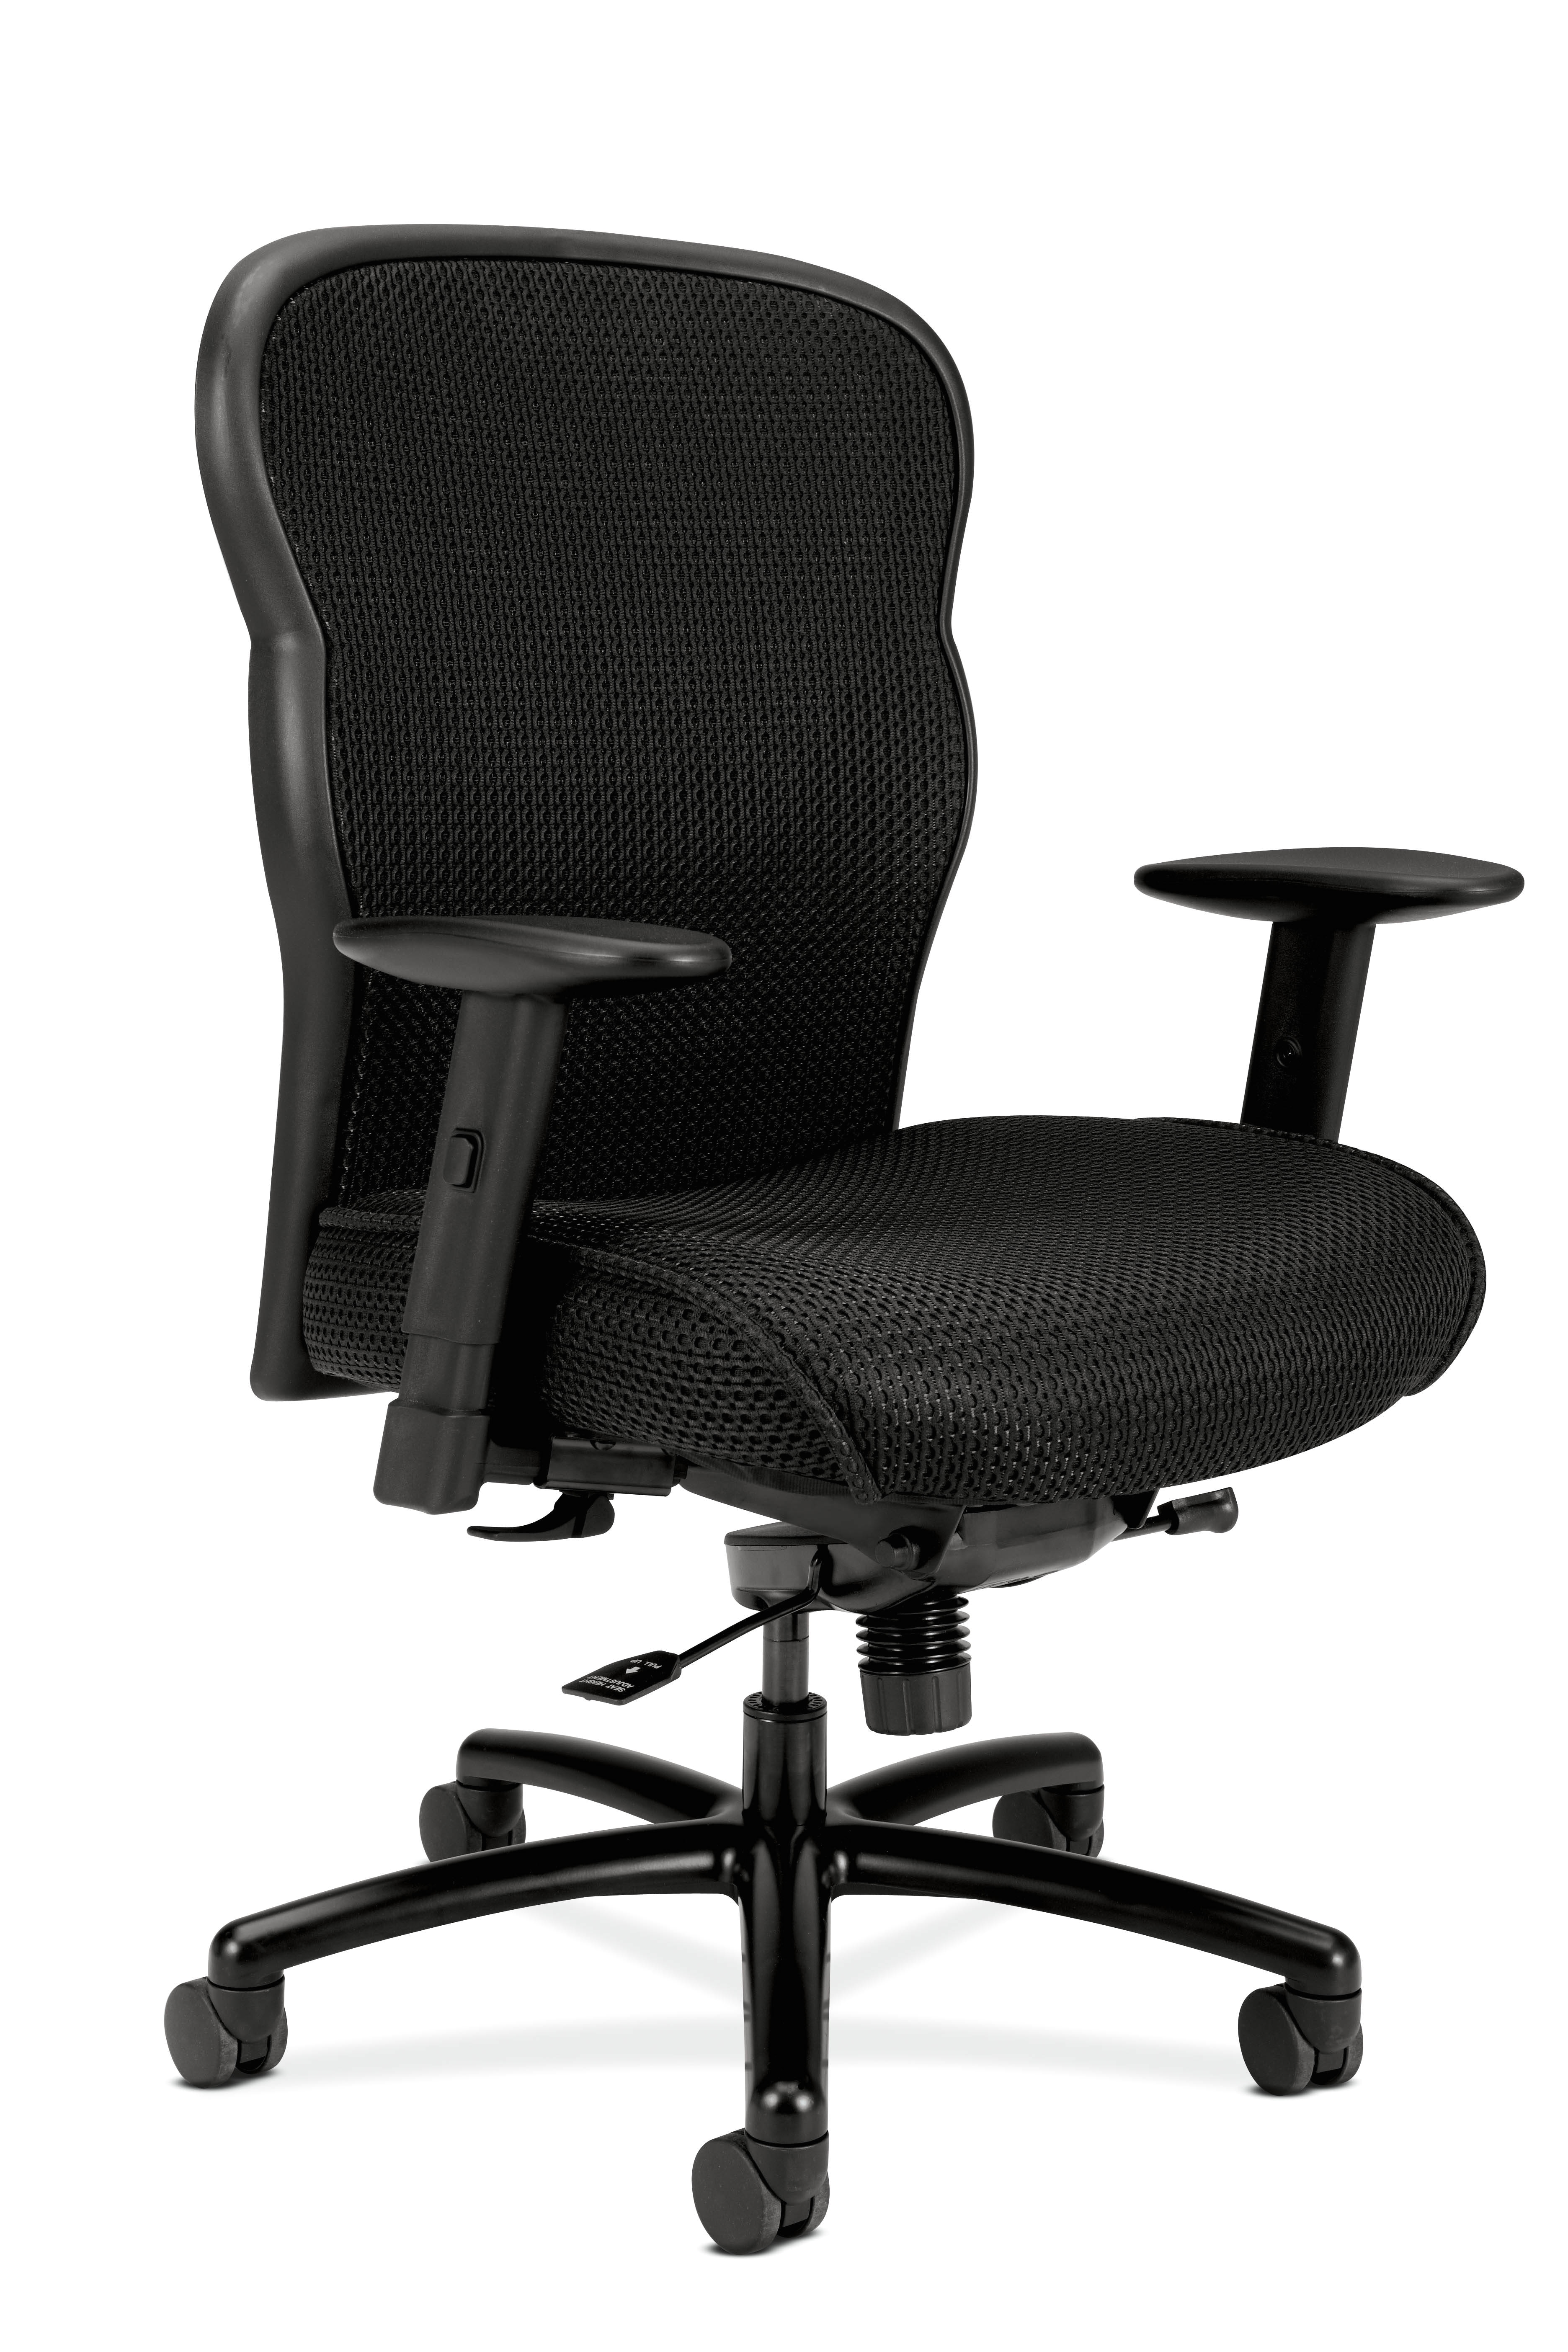 Best Office Chair for Tall Person Basyx by Hon Vl705 Mesh Big Tall Chair 41 12 H X 29 12 W X 25 58 D